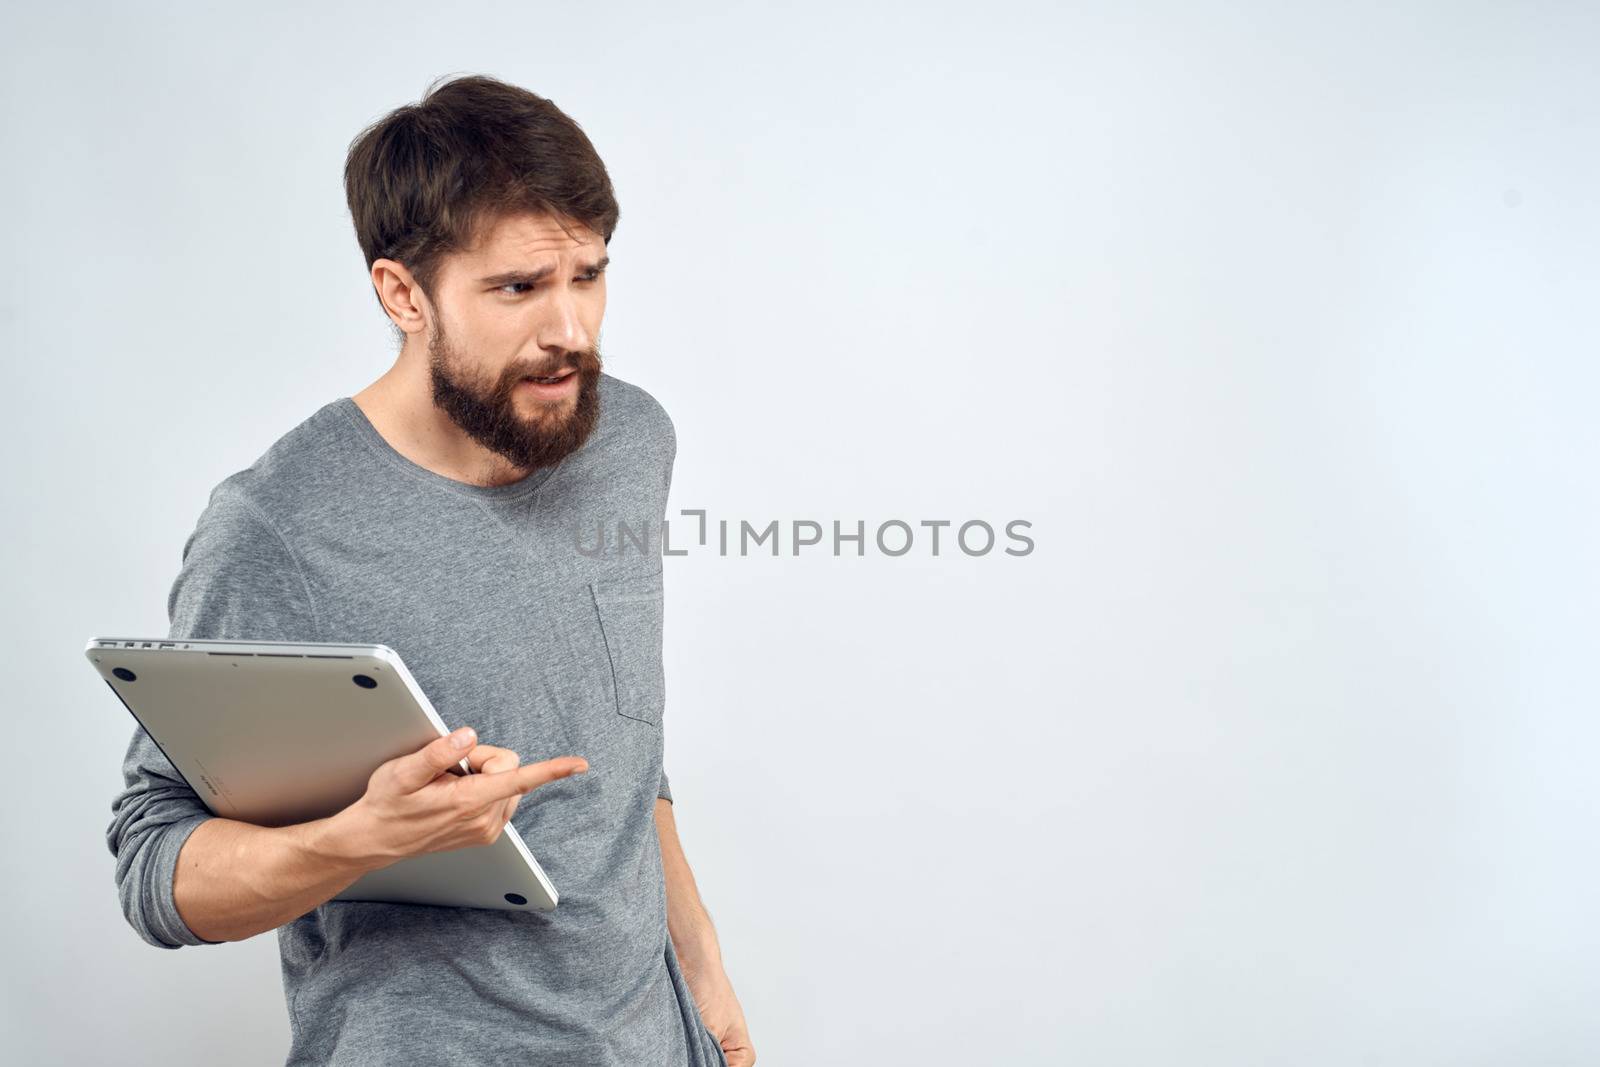 Man with laptop in hands technology internet self-confidence light background. High quality photo